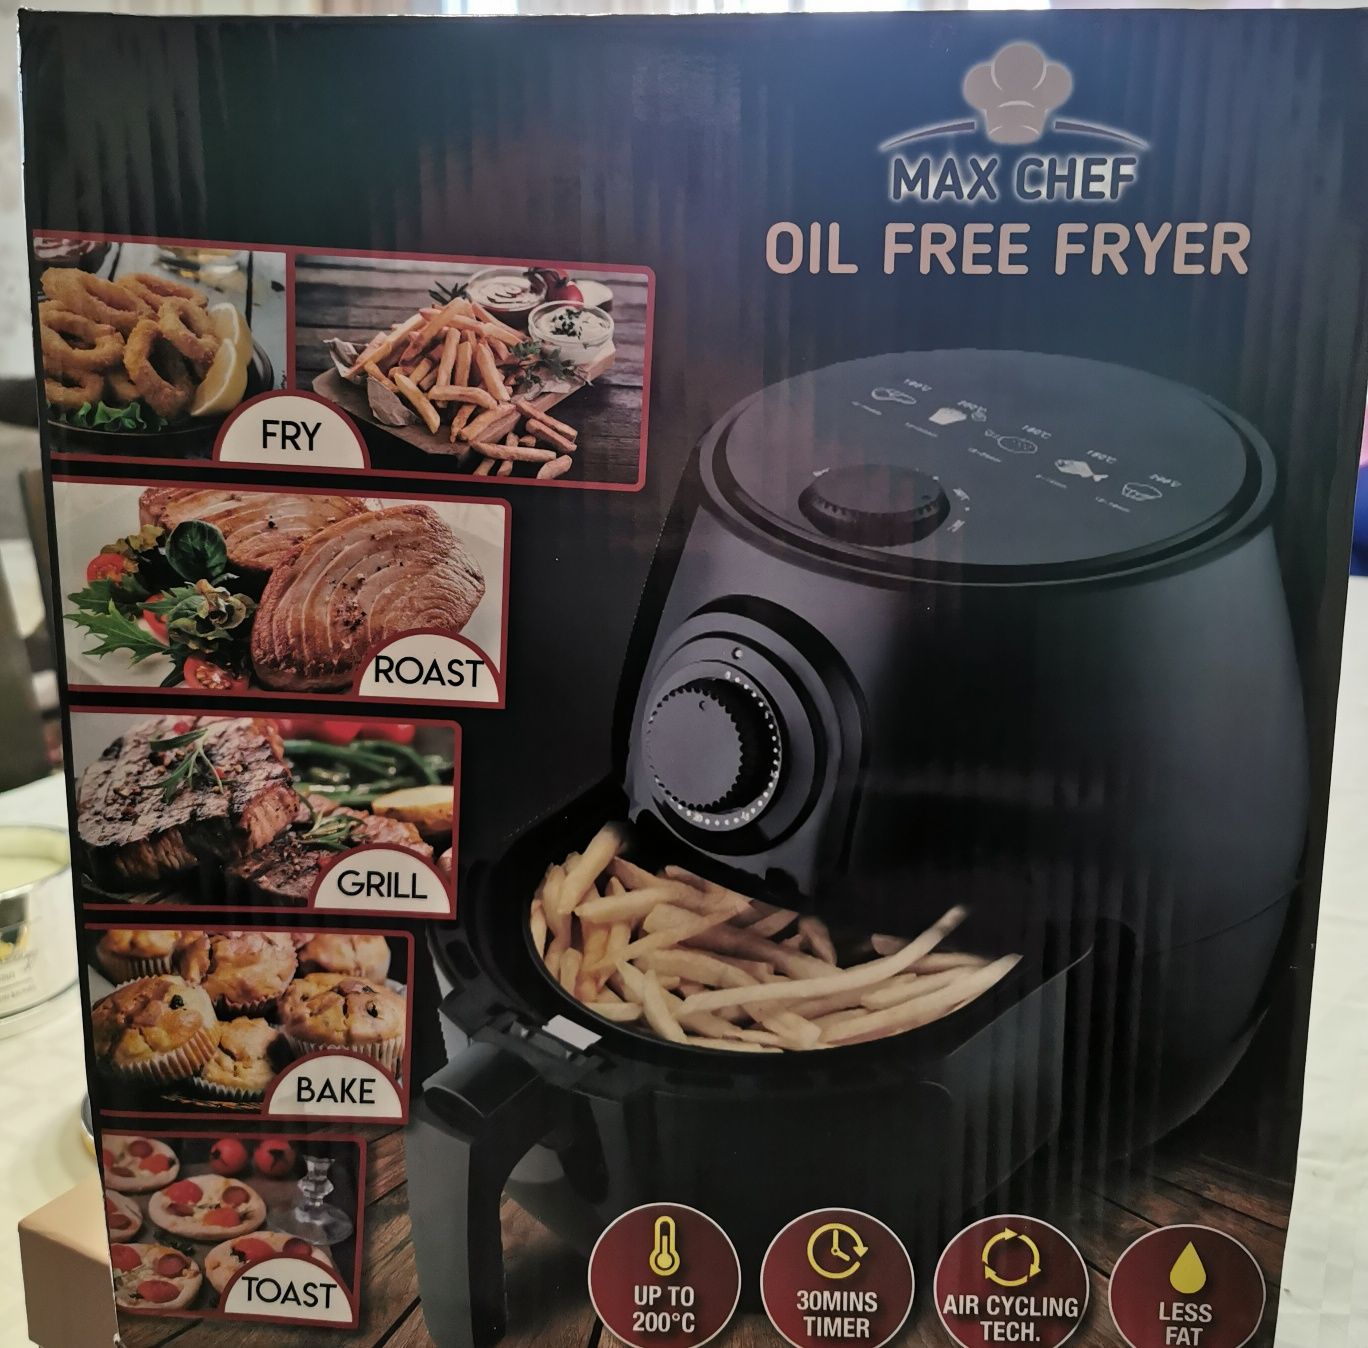 Oil free fryer max chef